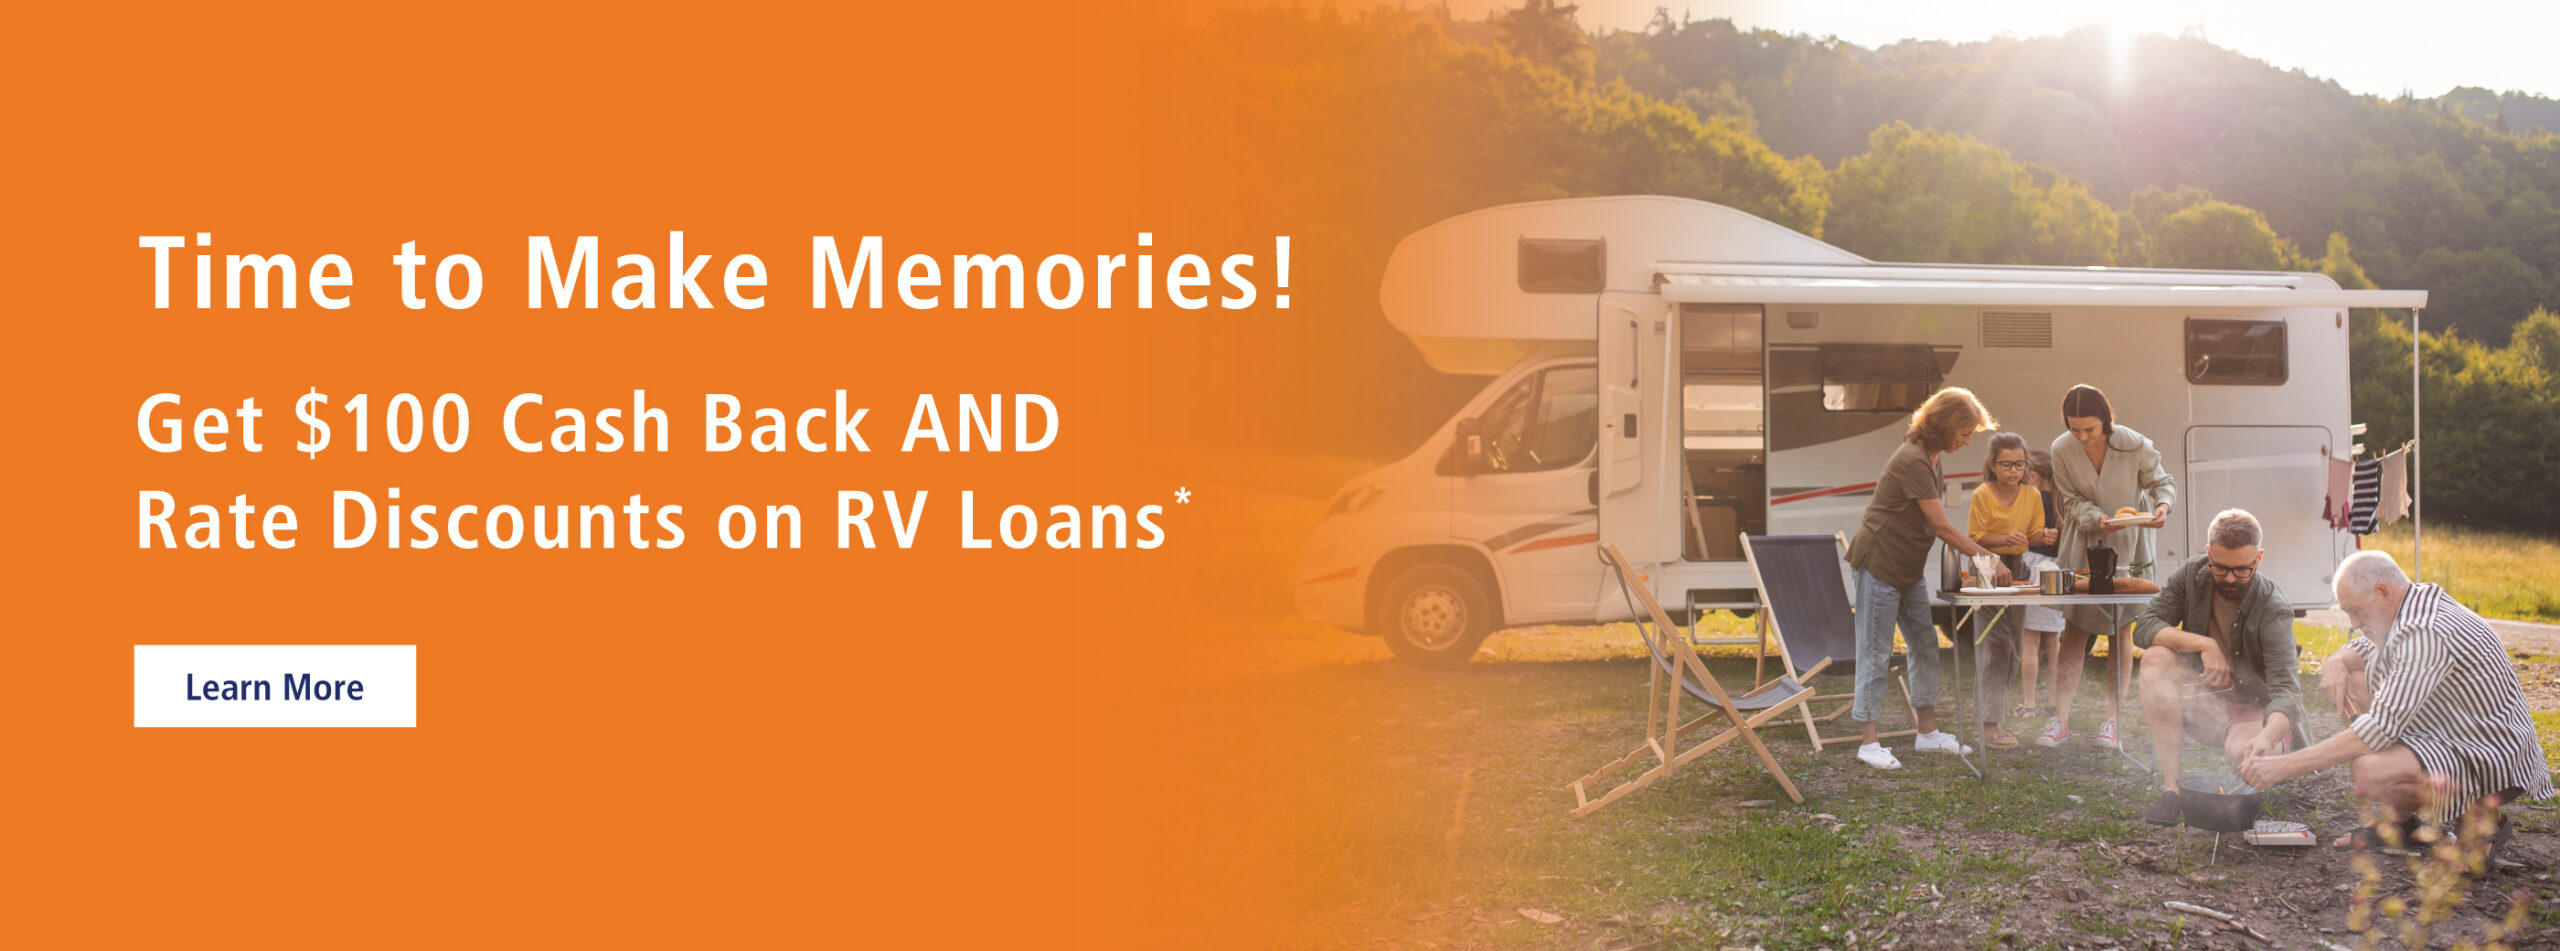 RV Home Page Banner